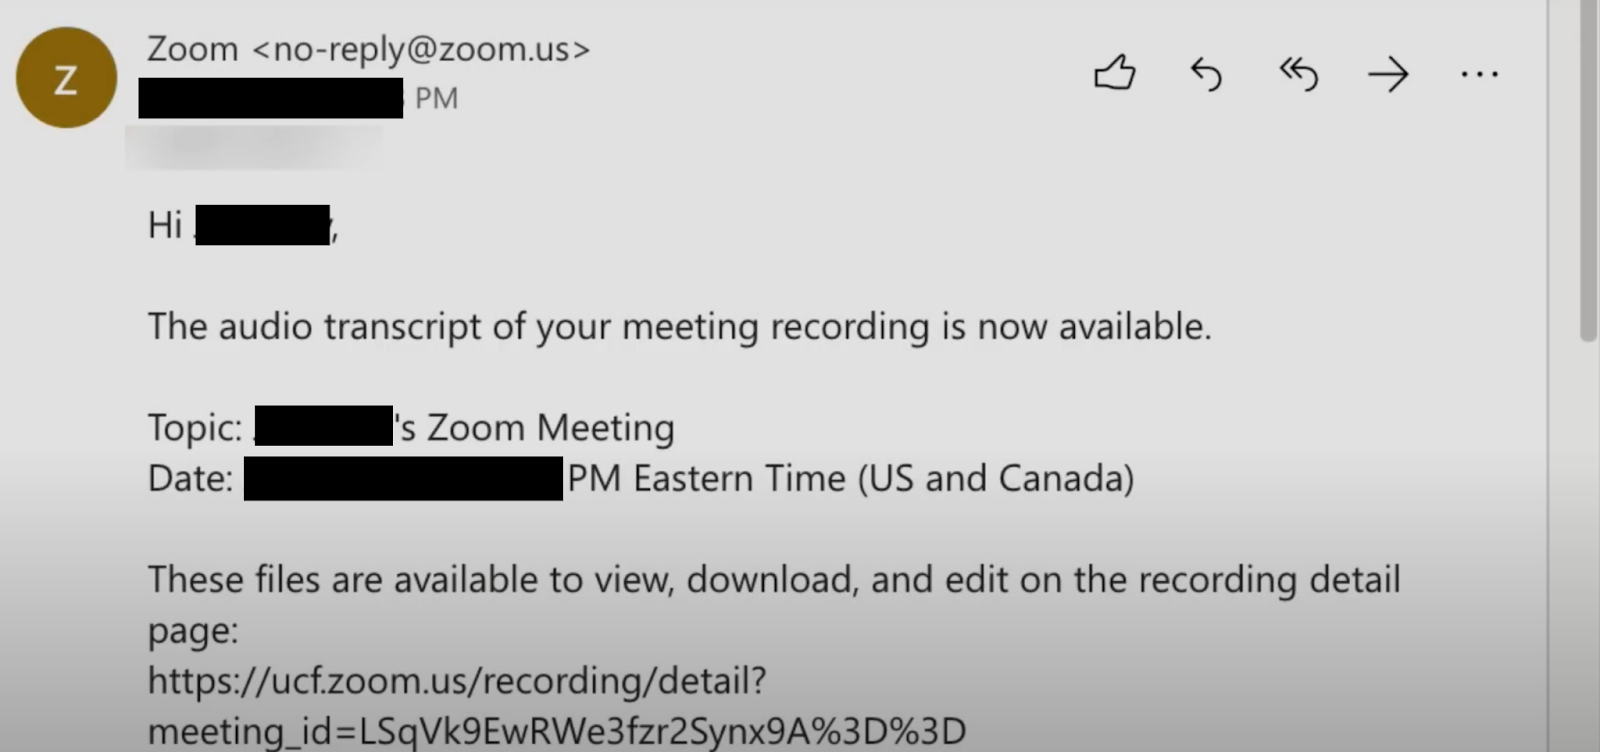 Zoom meeting transcript - Email with the recording and transcript link